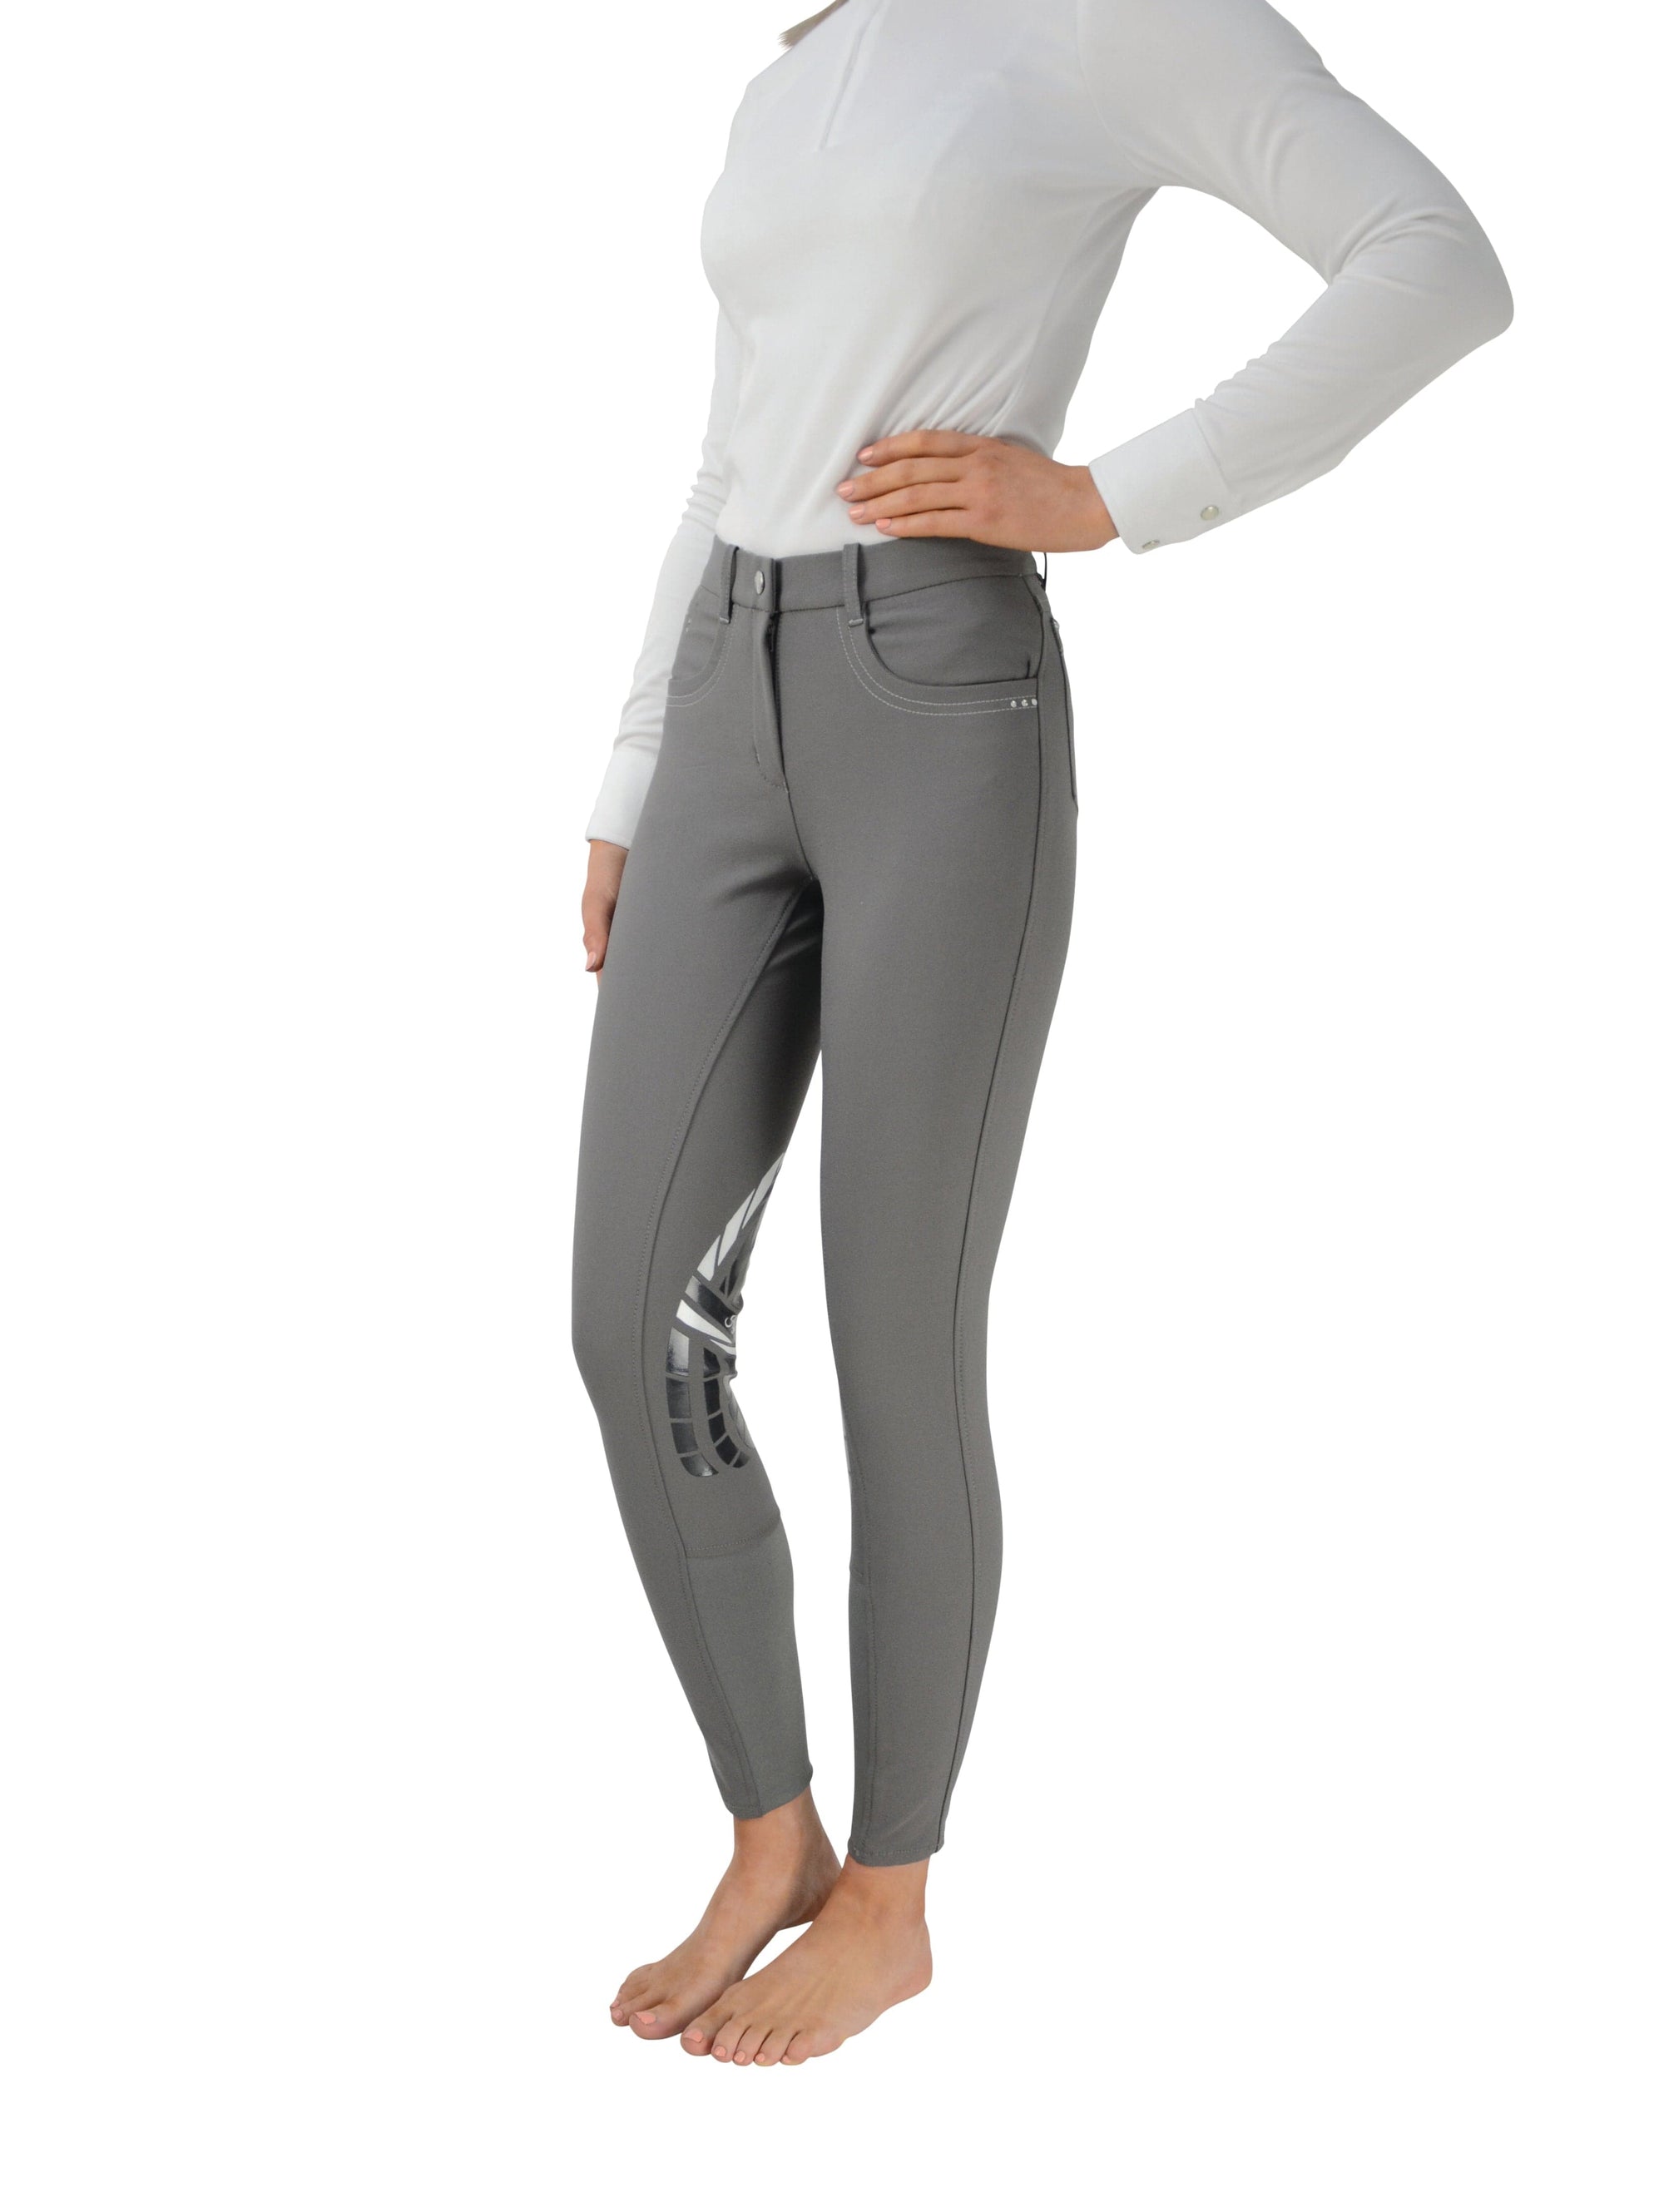 Hyperformance corby cool ladies breeches